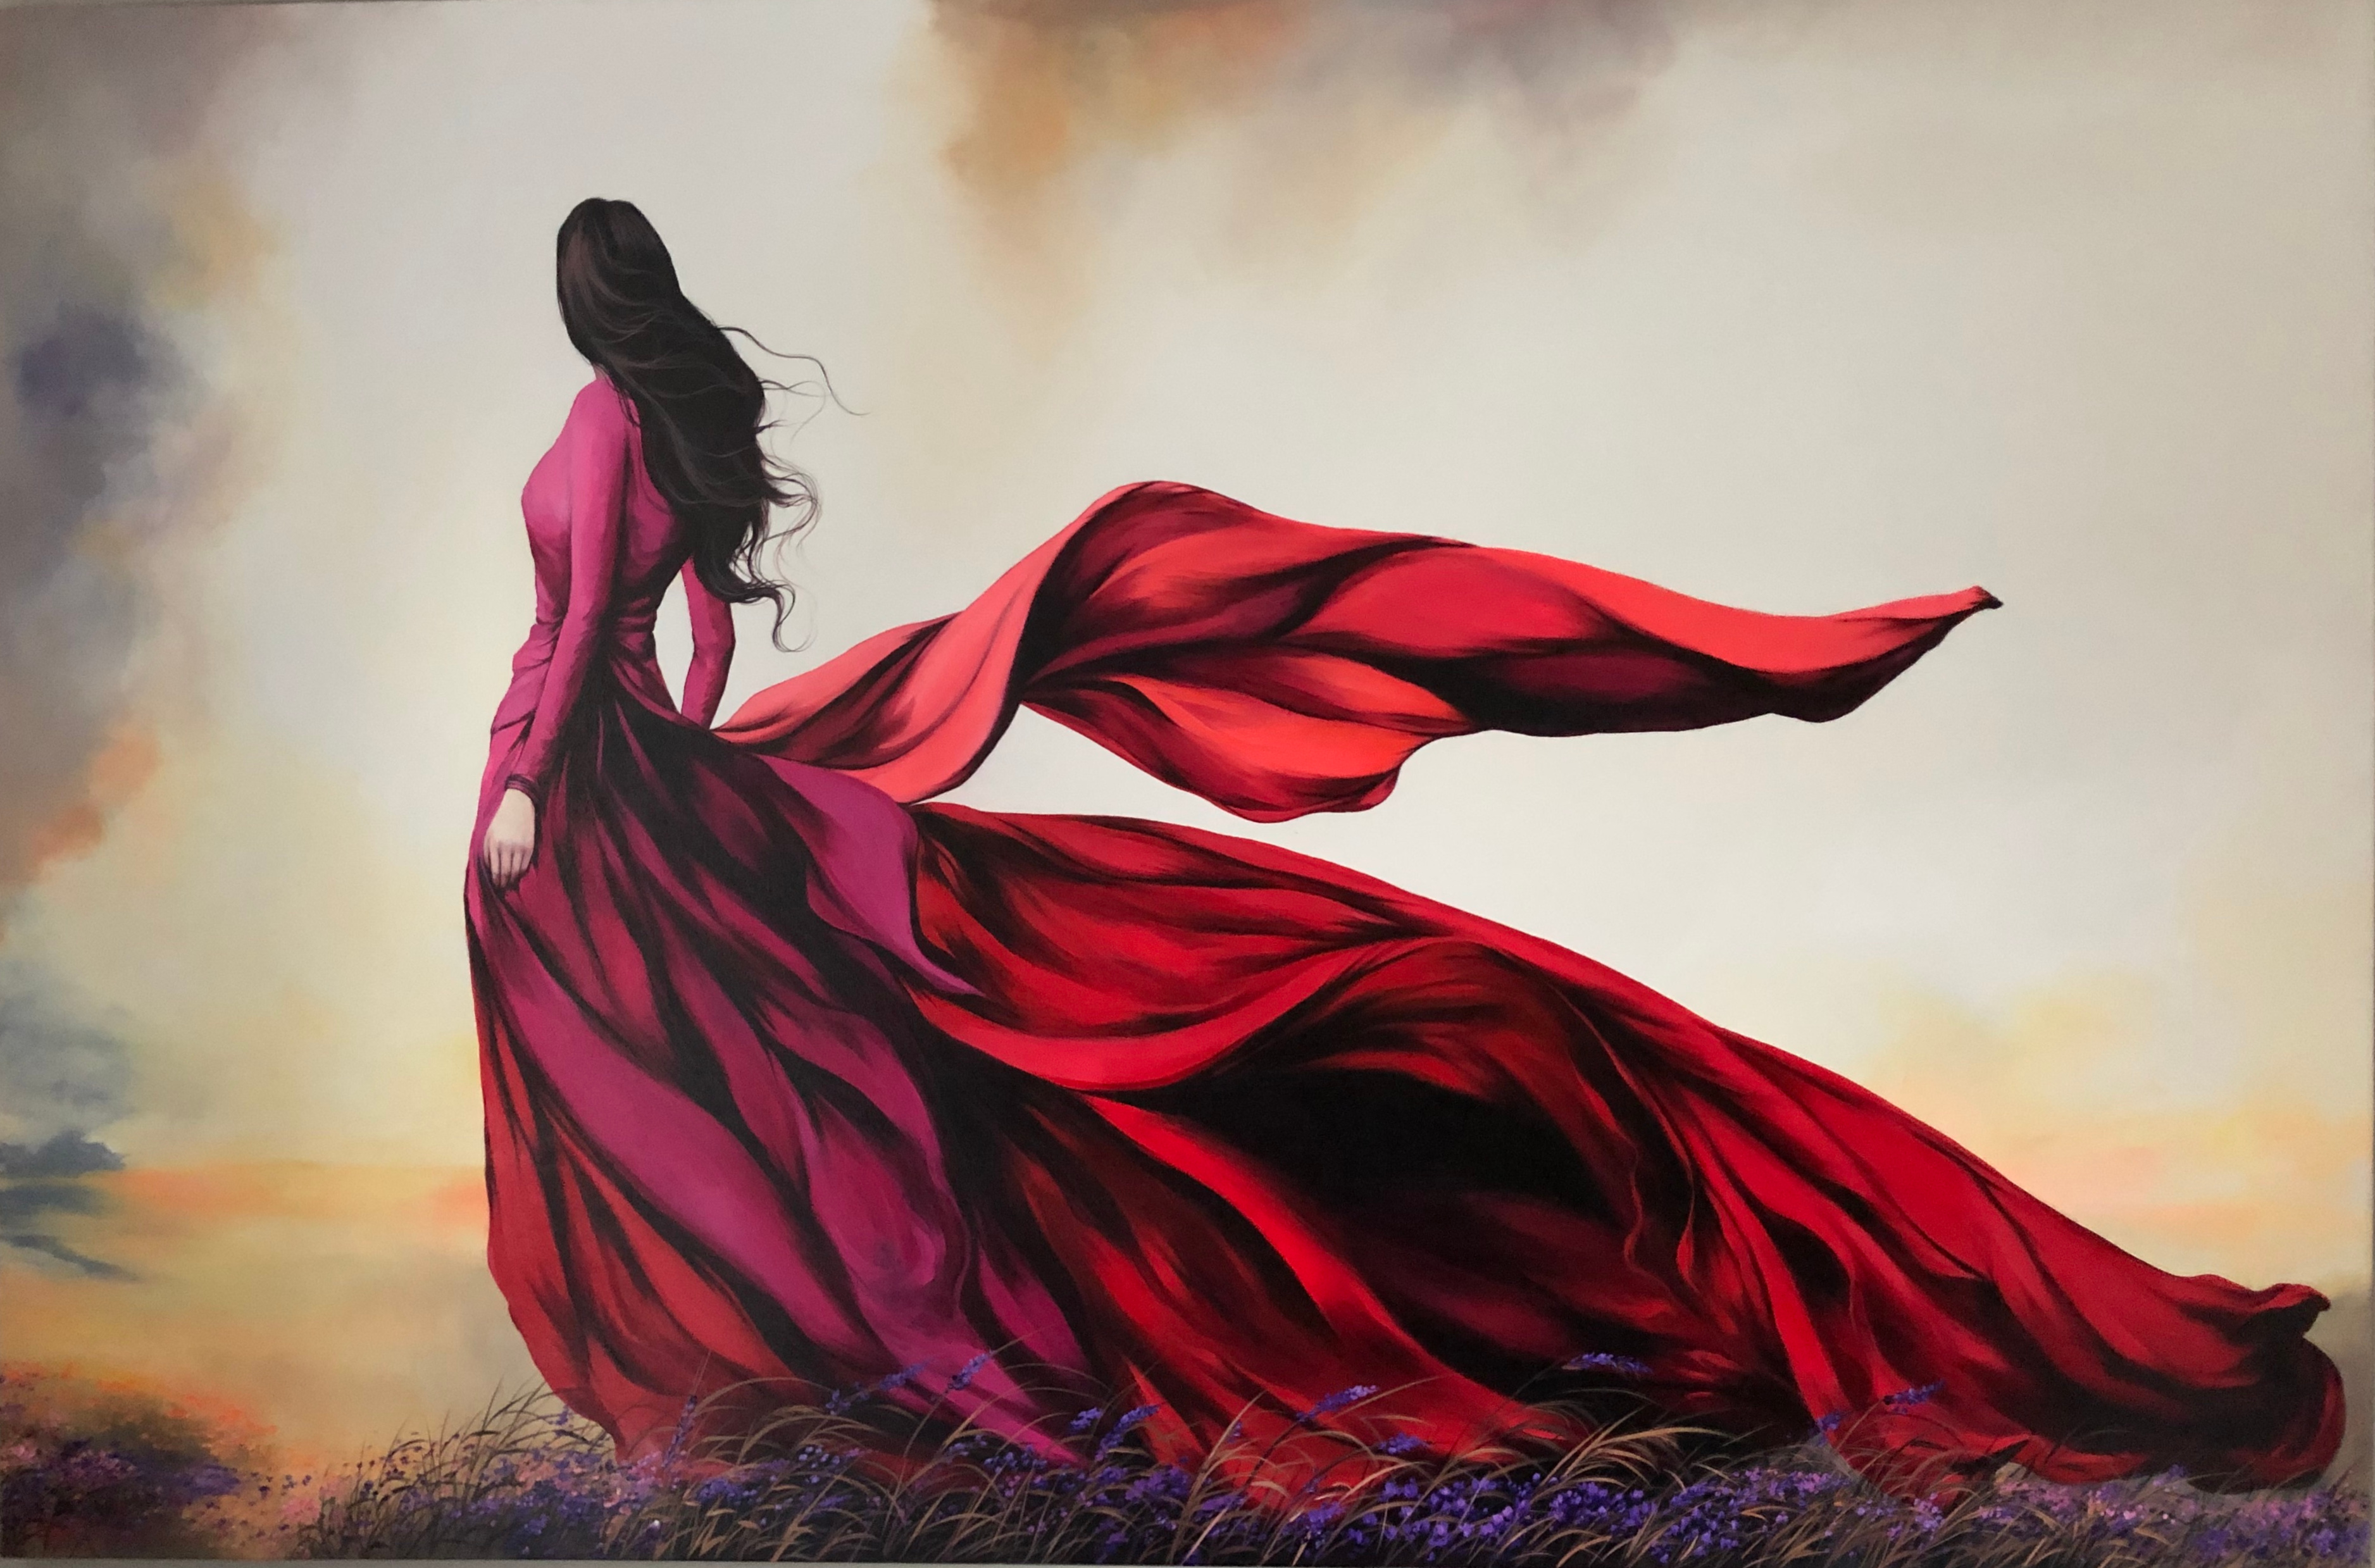 The Woman in the Red Dress